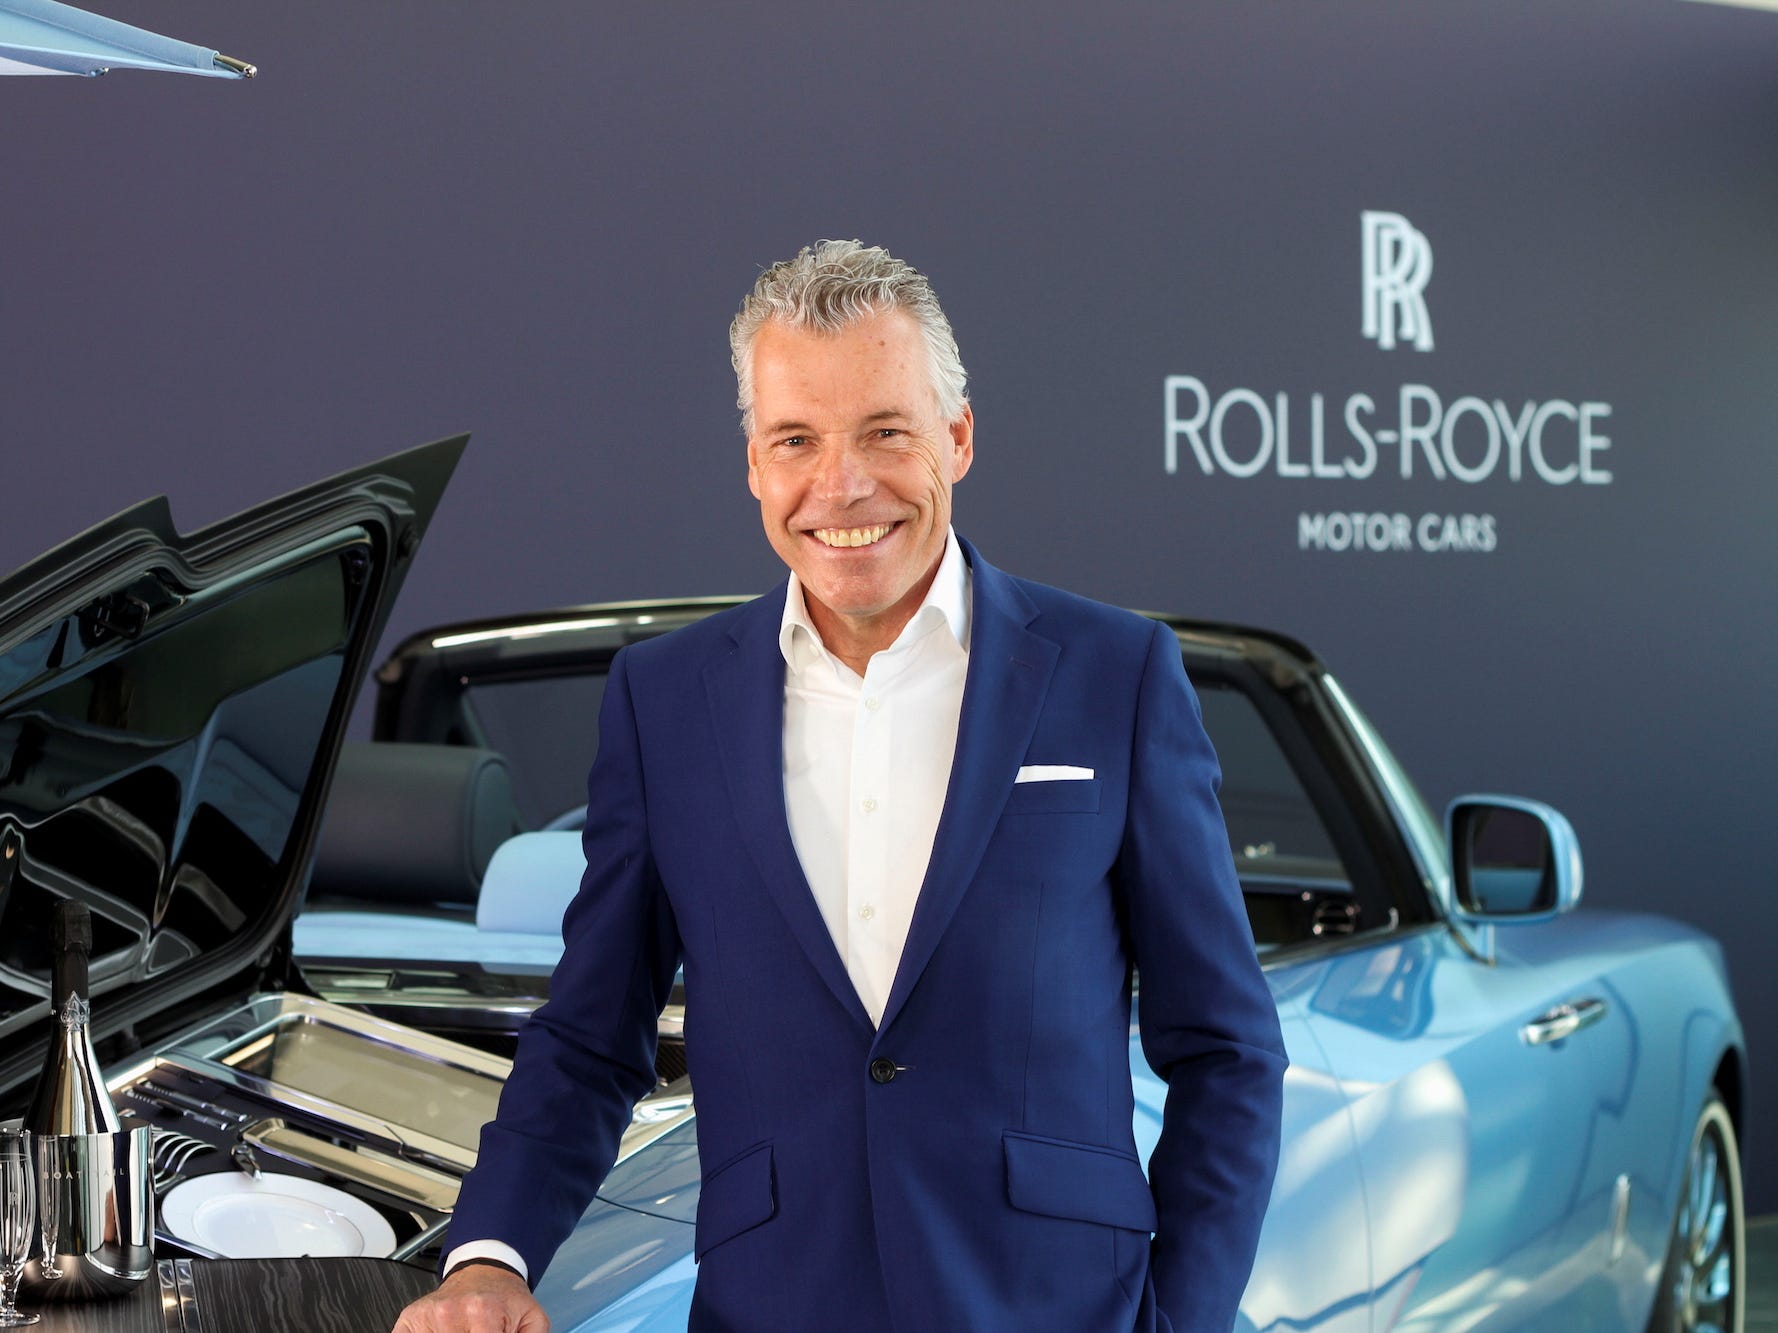 Torsten Muller-Otvos, CEO of Rolls-Royce, poses next to a car